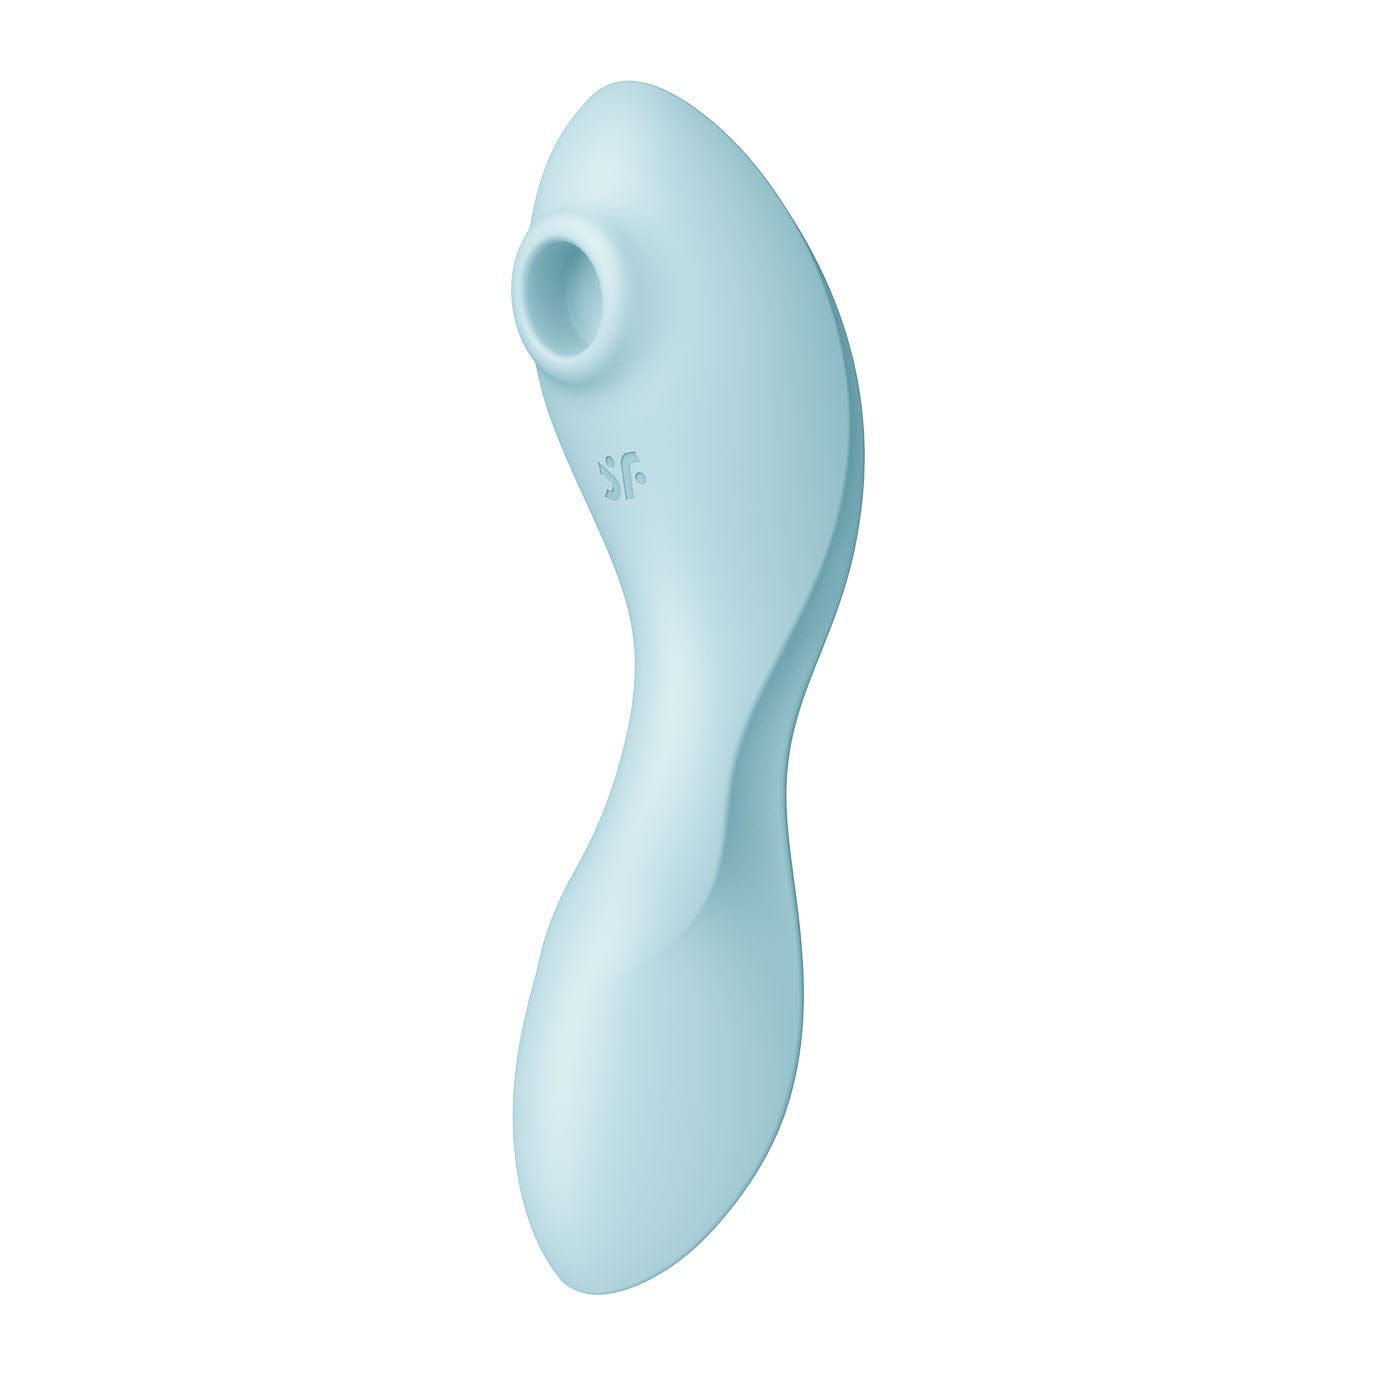 Satisfyer - Curvy App-Controlled Trinity 5 Clitoral Air Stimulator Vibrator (Light Blue) -  Clit Massager (Vibration) Rechargeable  Durio.sg